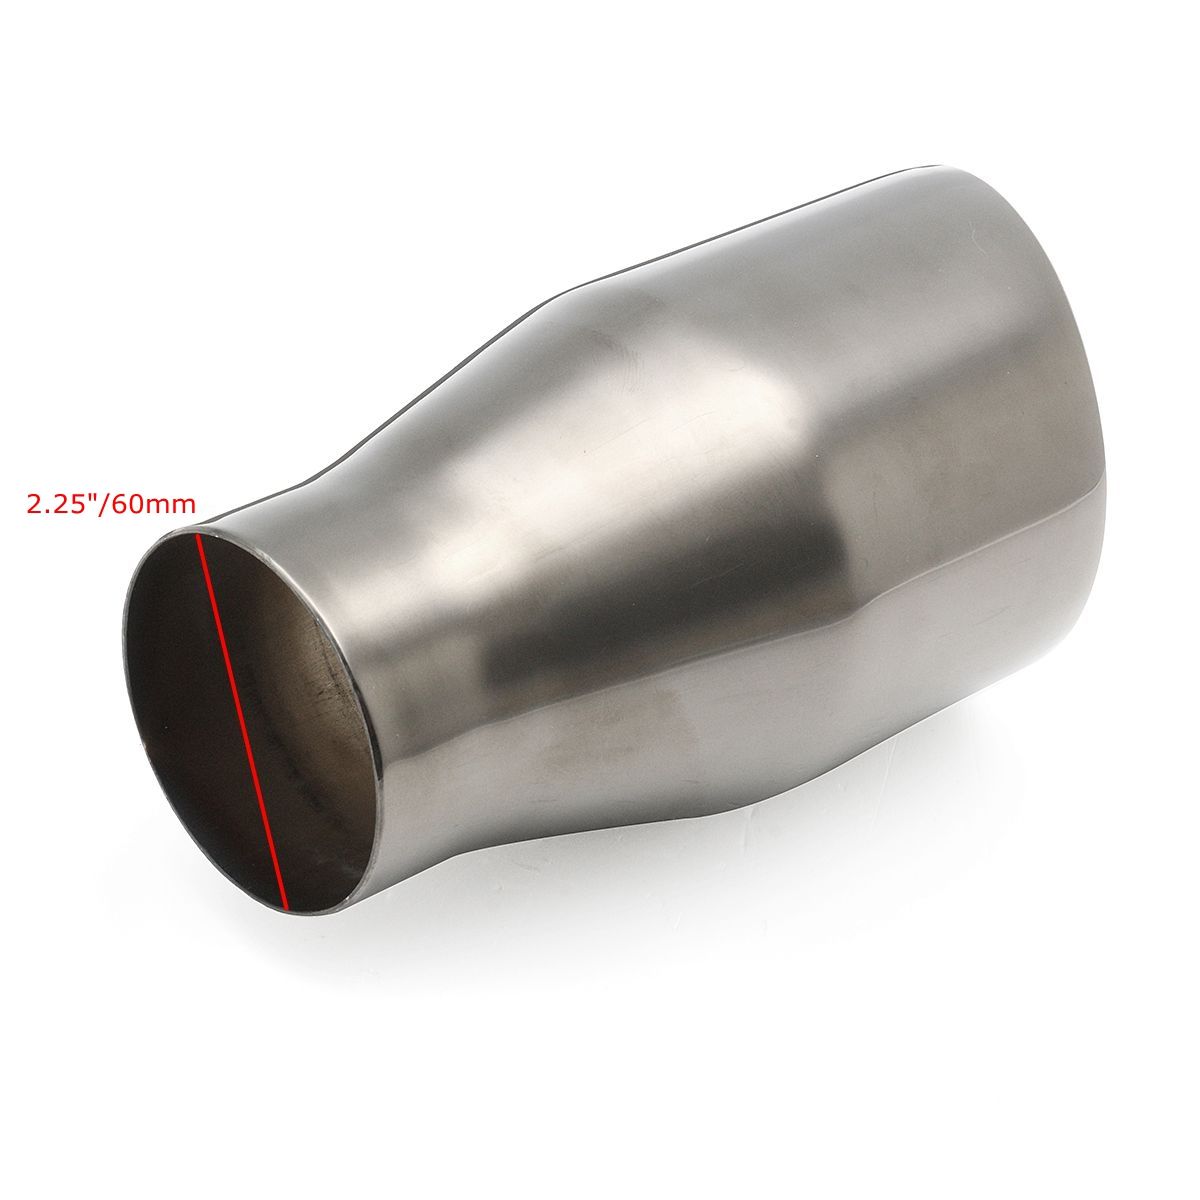 1Pc-7-Inch-Length-35-Inch-Outlet-236-Inch-Inlet-Stainless-Exhaust-Muffler-Tip-1425610